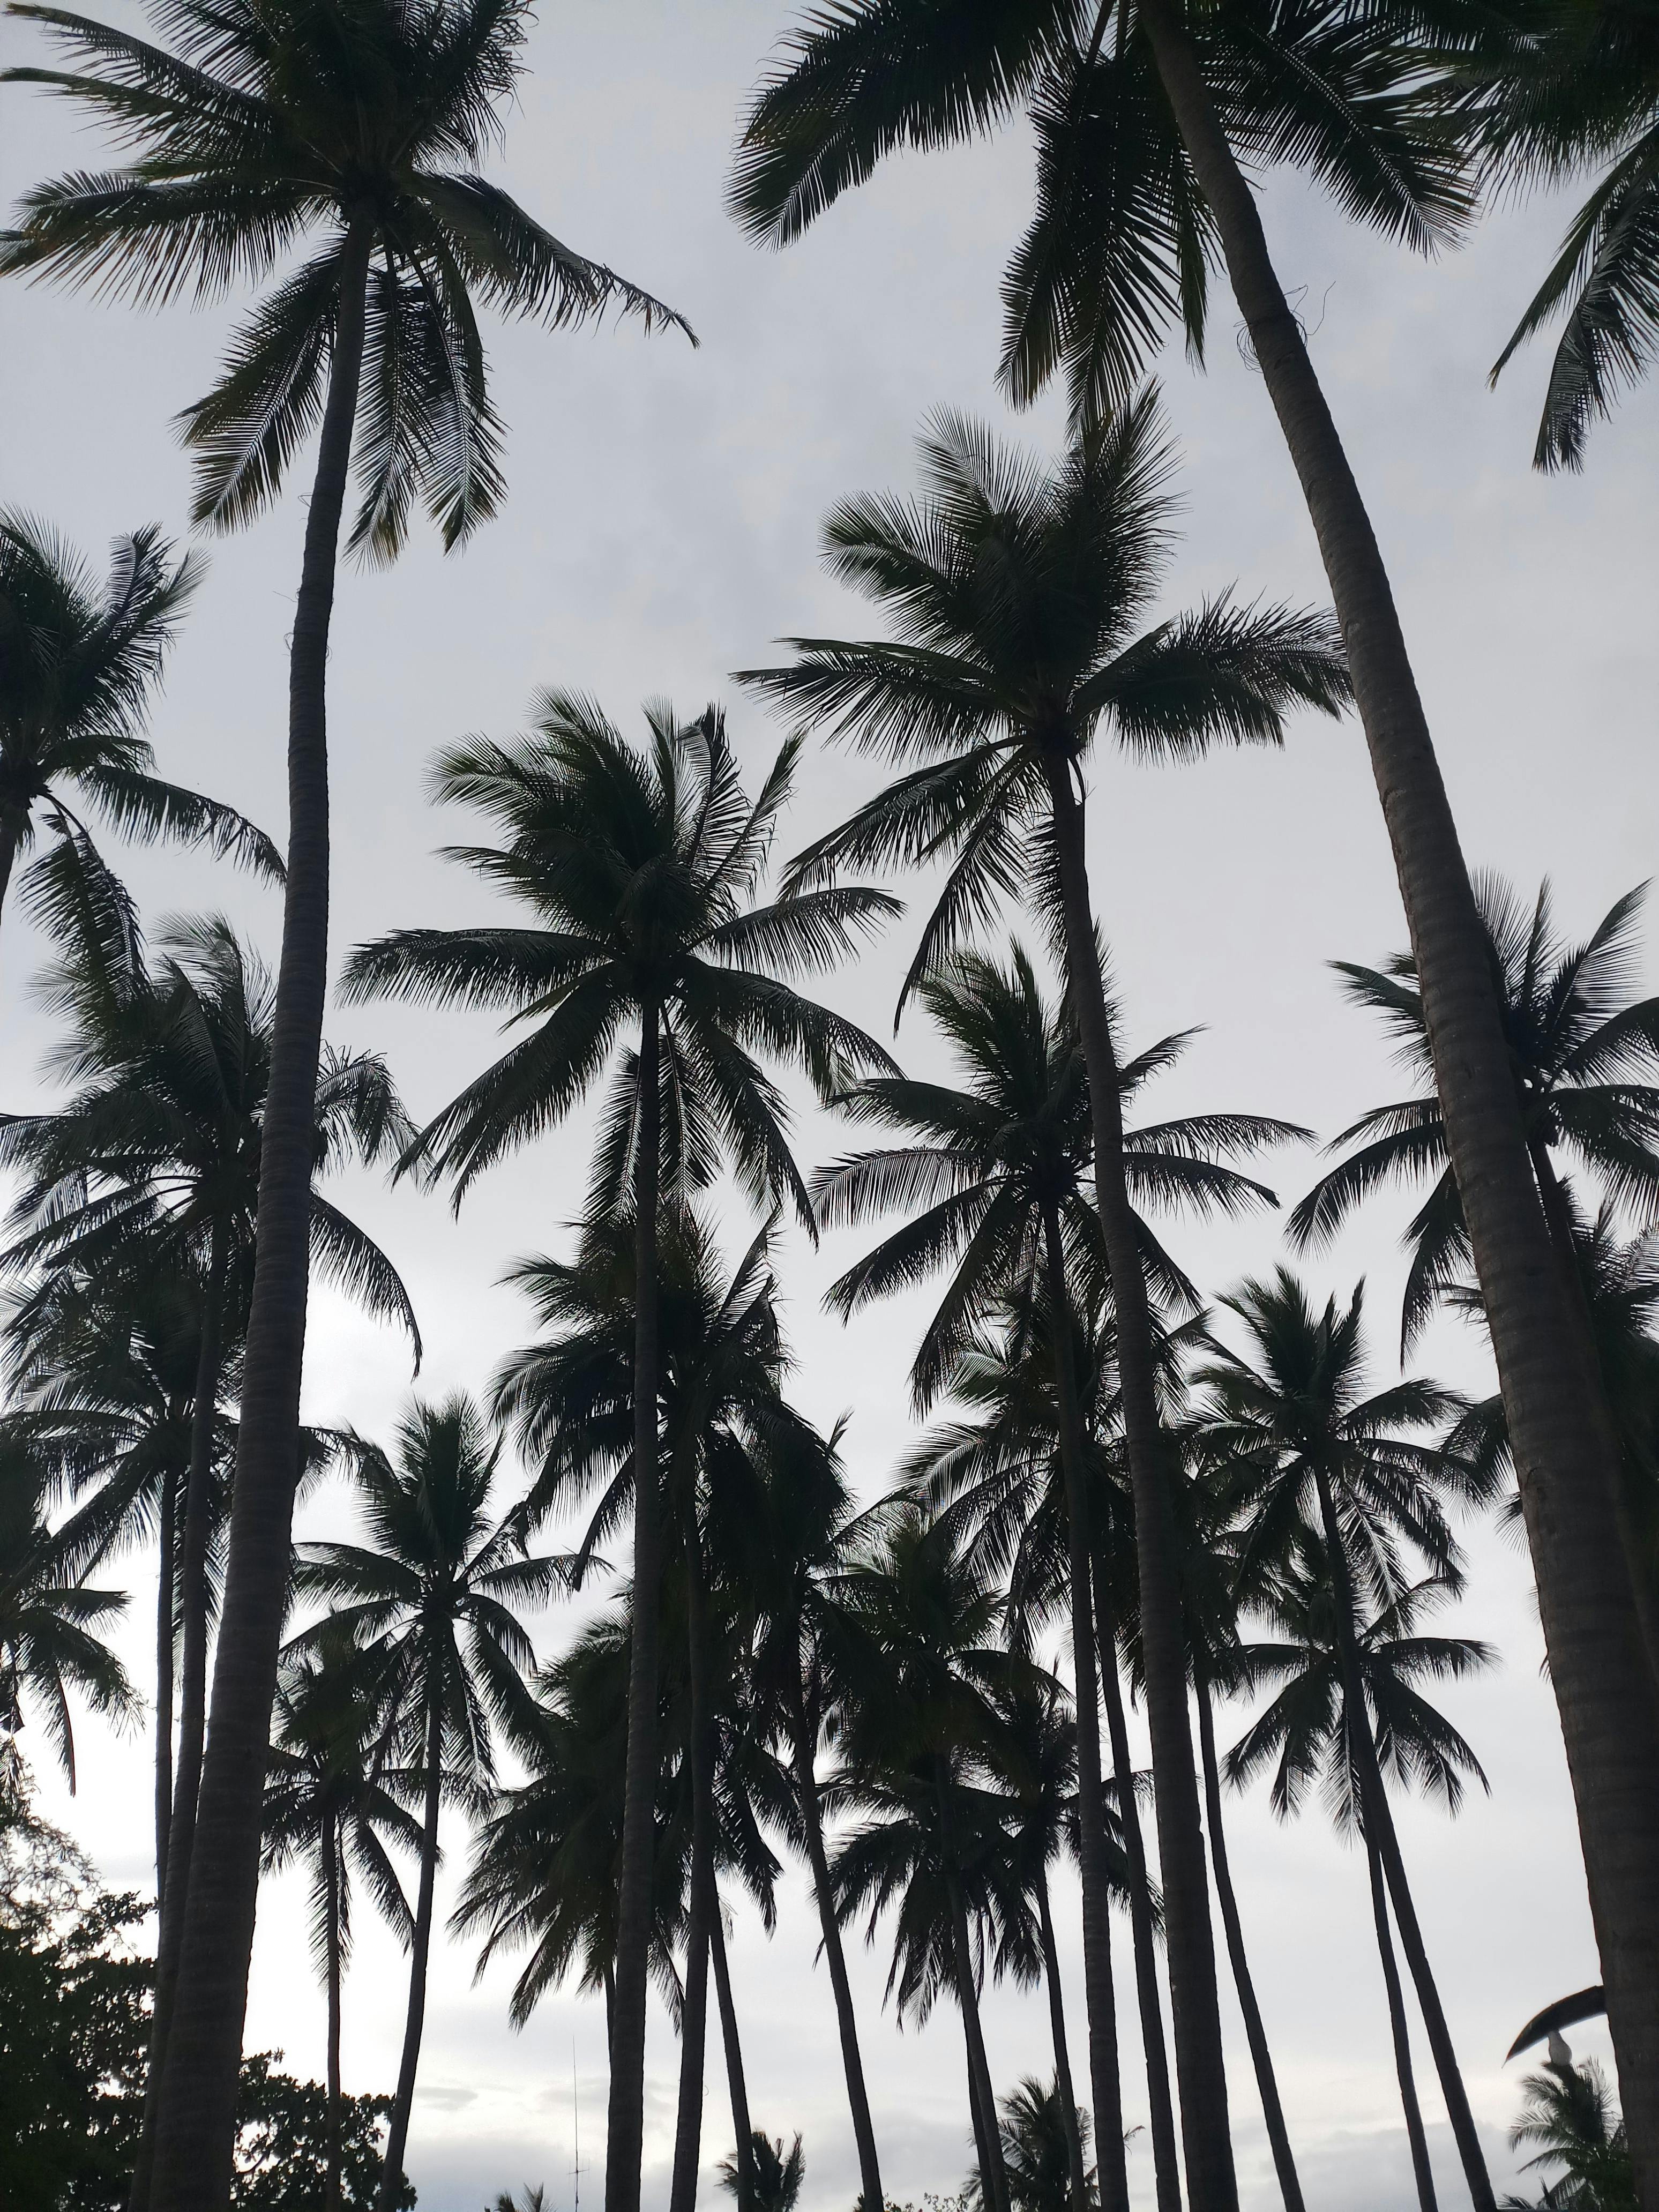 Wallpaper ID 265979  a cluster of palm trees palm trees 4k wallpaper  free download